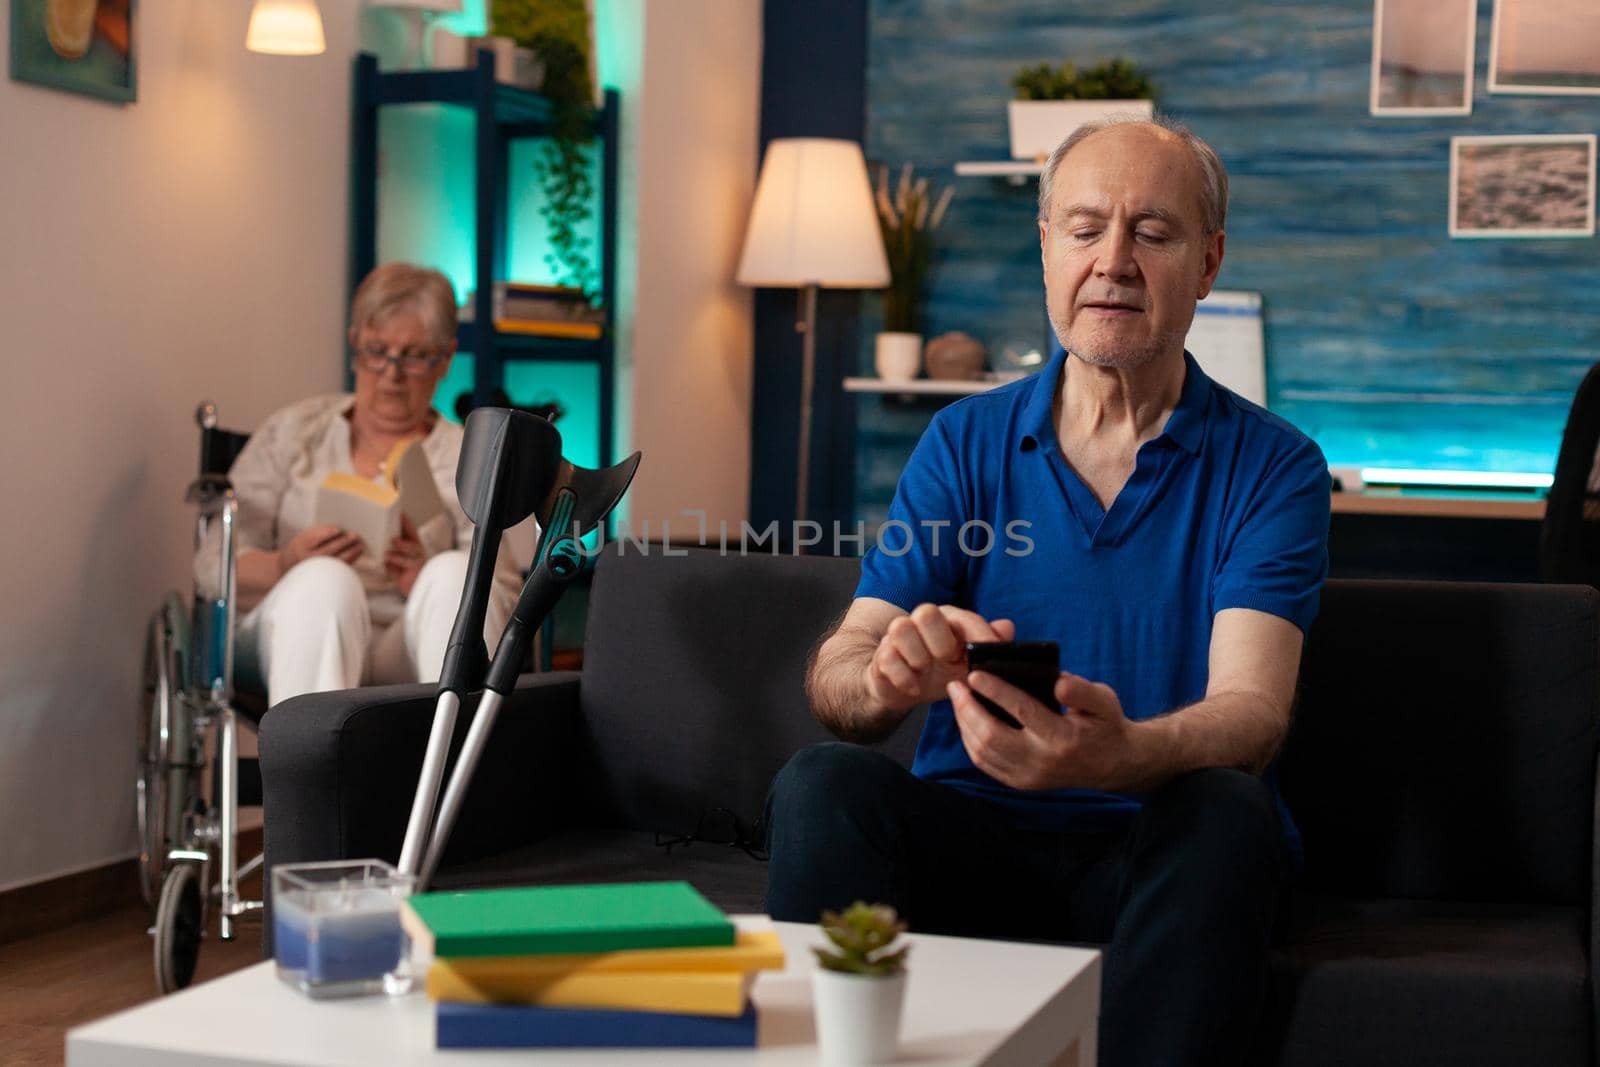 Aged caucasian man using smartphone on living room sofa. Senior adult holding modern device with technology looking at screen while old woman in wheelchair sitting in background